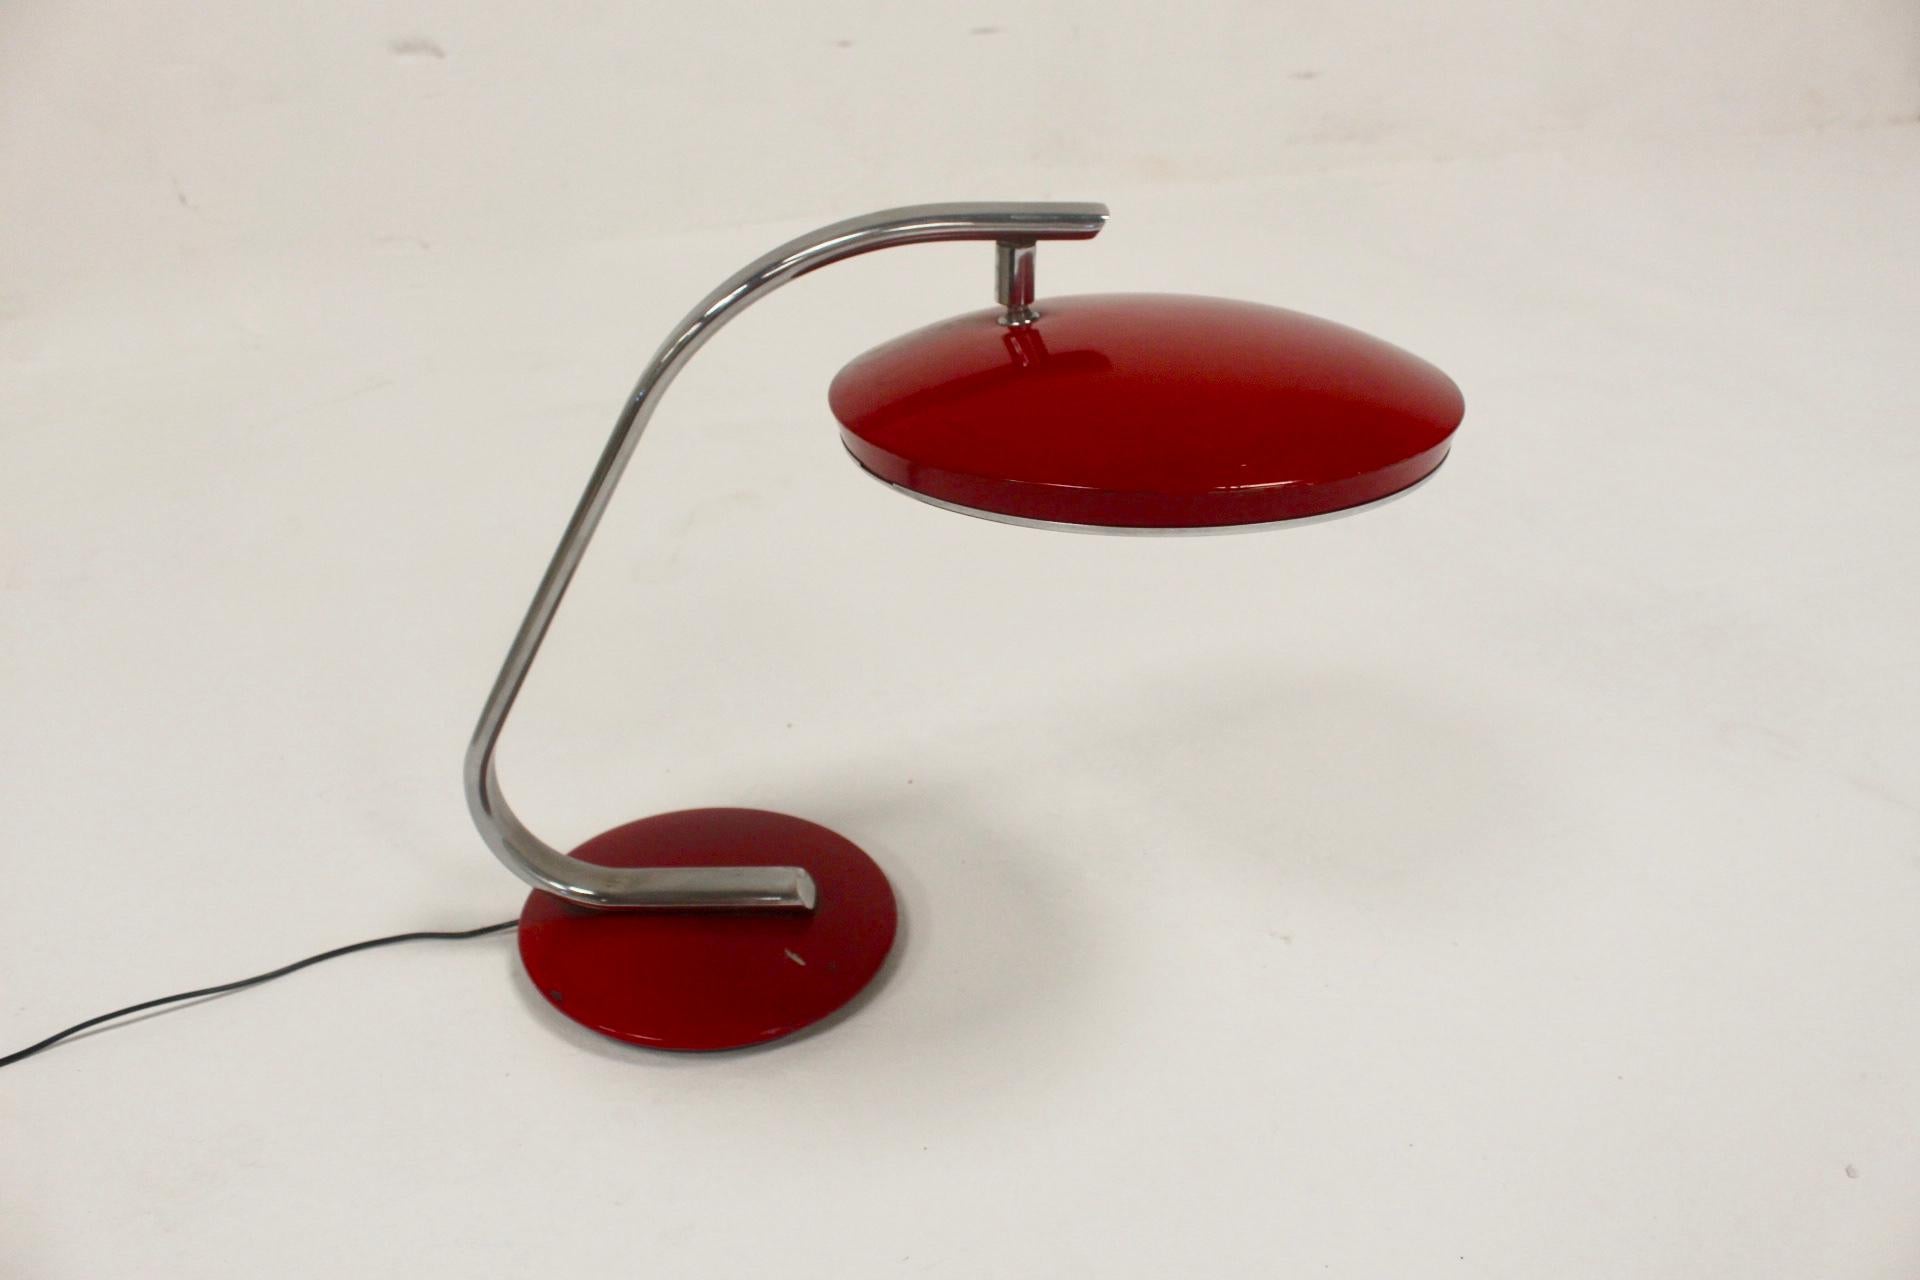 Midcentury Fase 520-C Bauhaus Design Red Articulated Desk Lamp For Sale 1